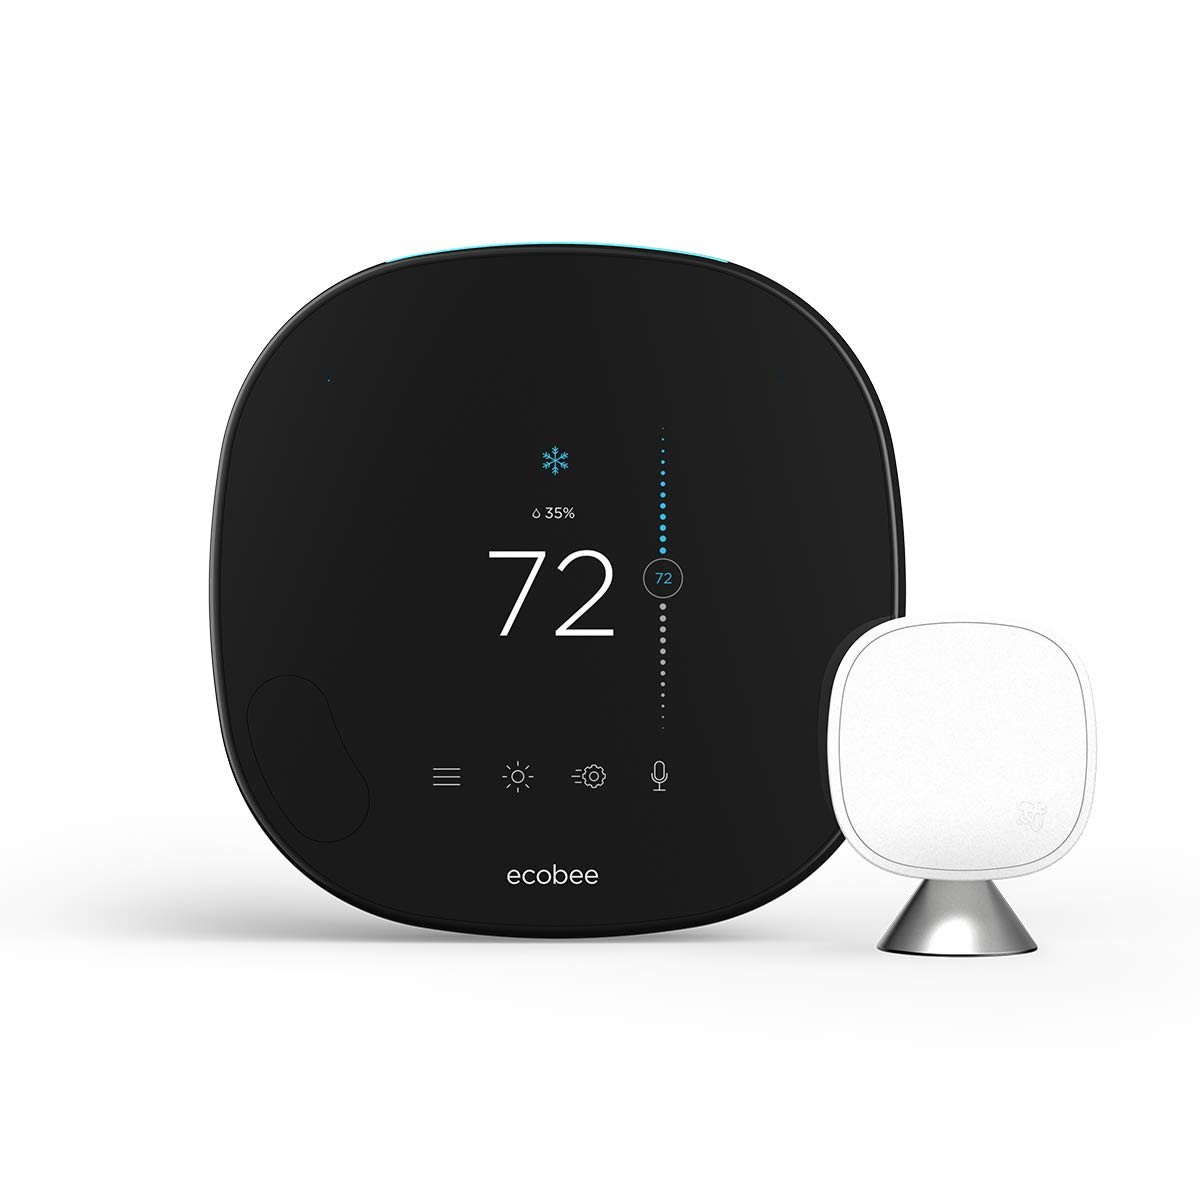 Ecobee SmartThermostat with Voice Control Review (The Ecobee Smart Thermostat with Voice Control.)